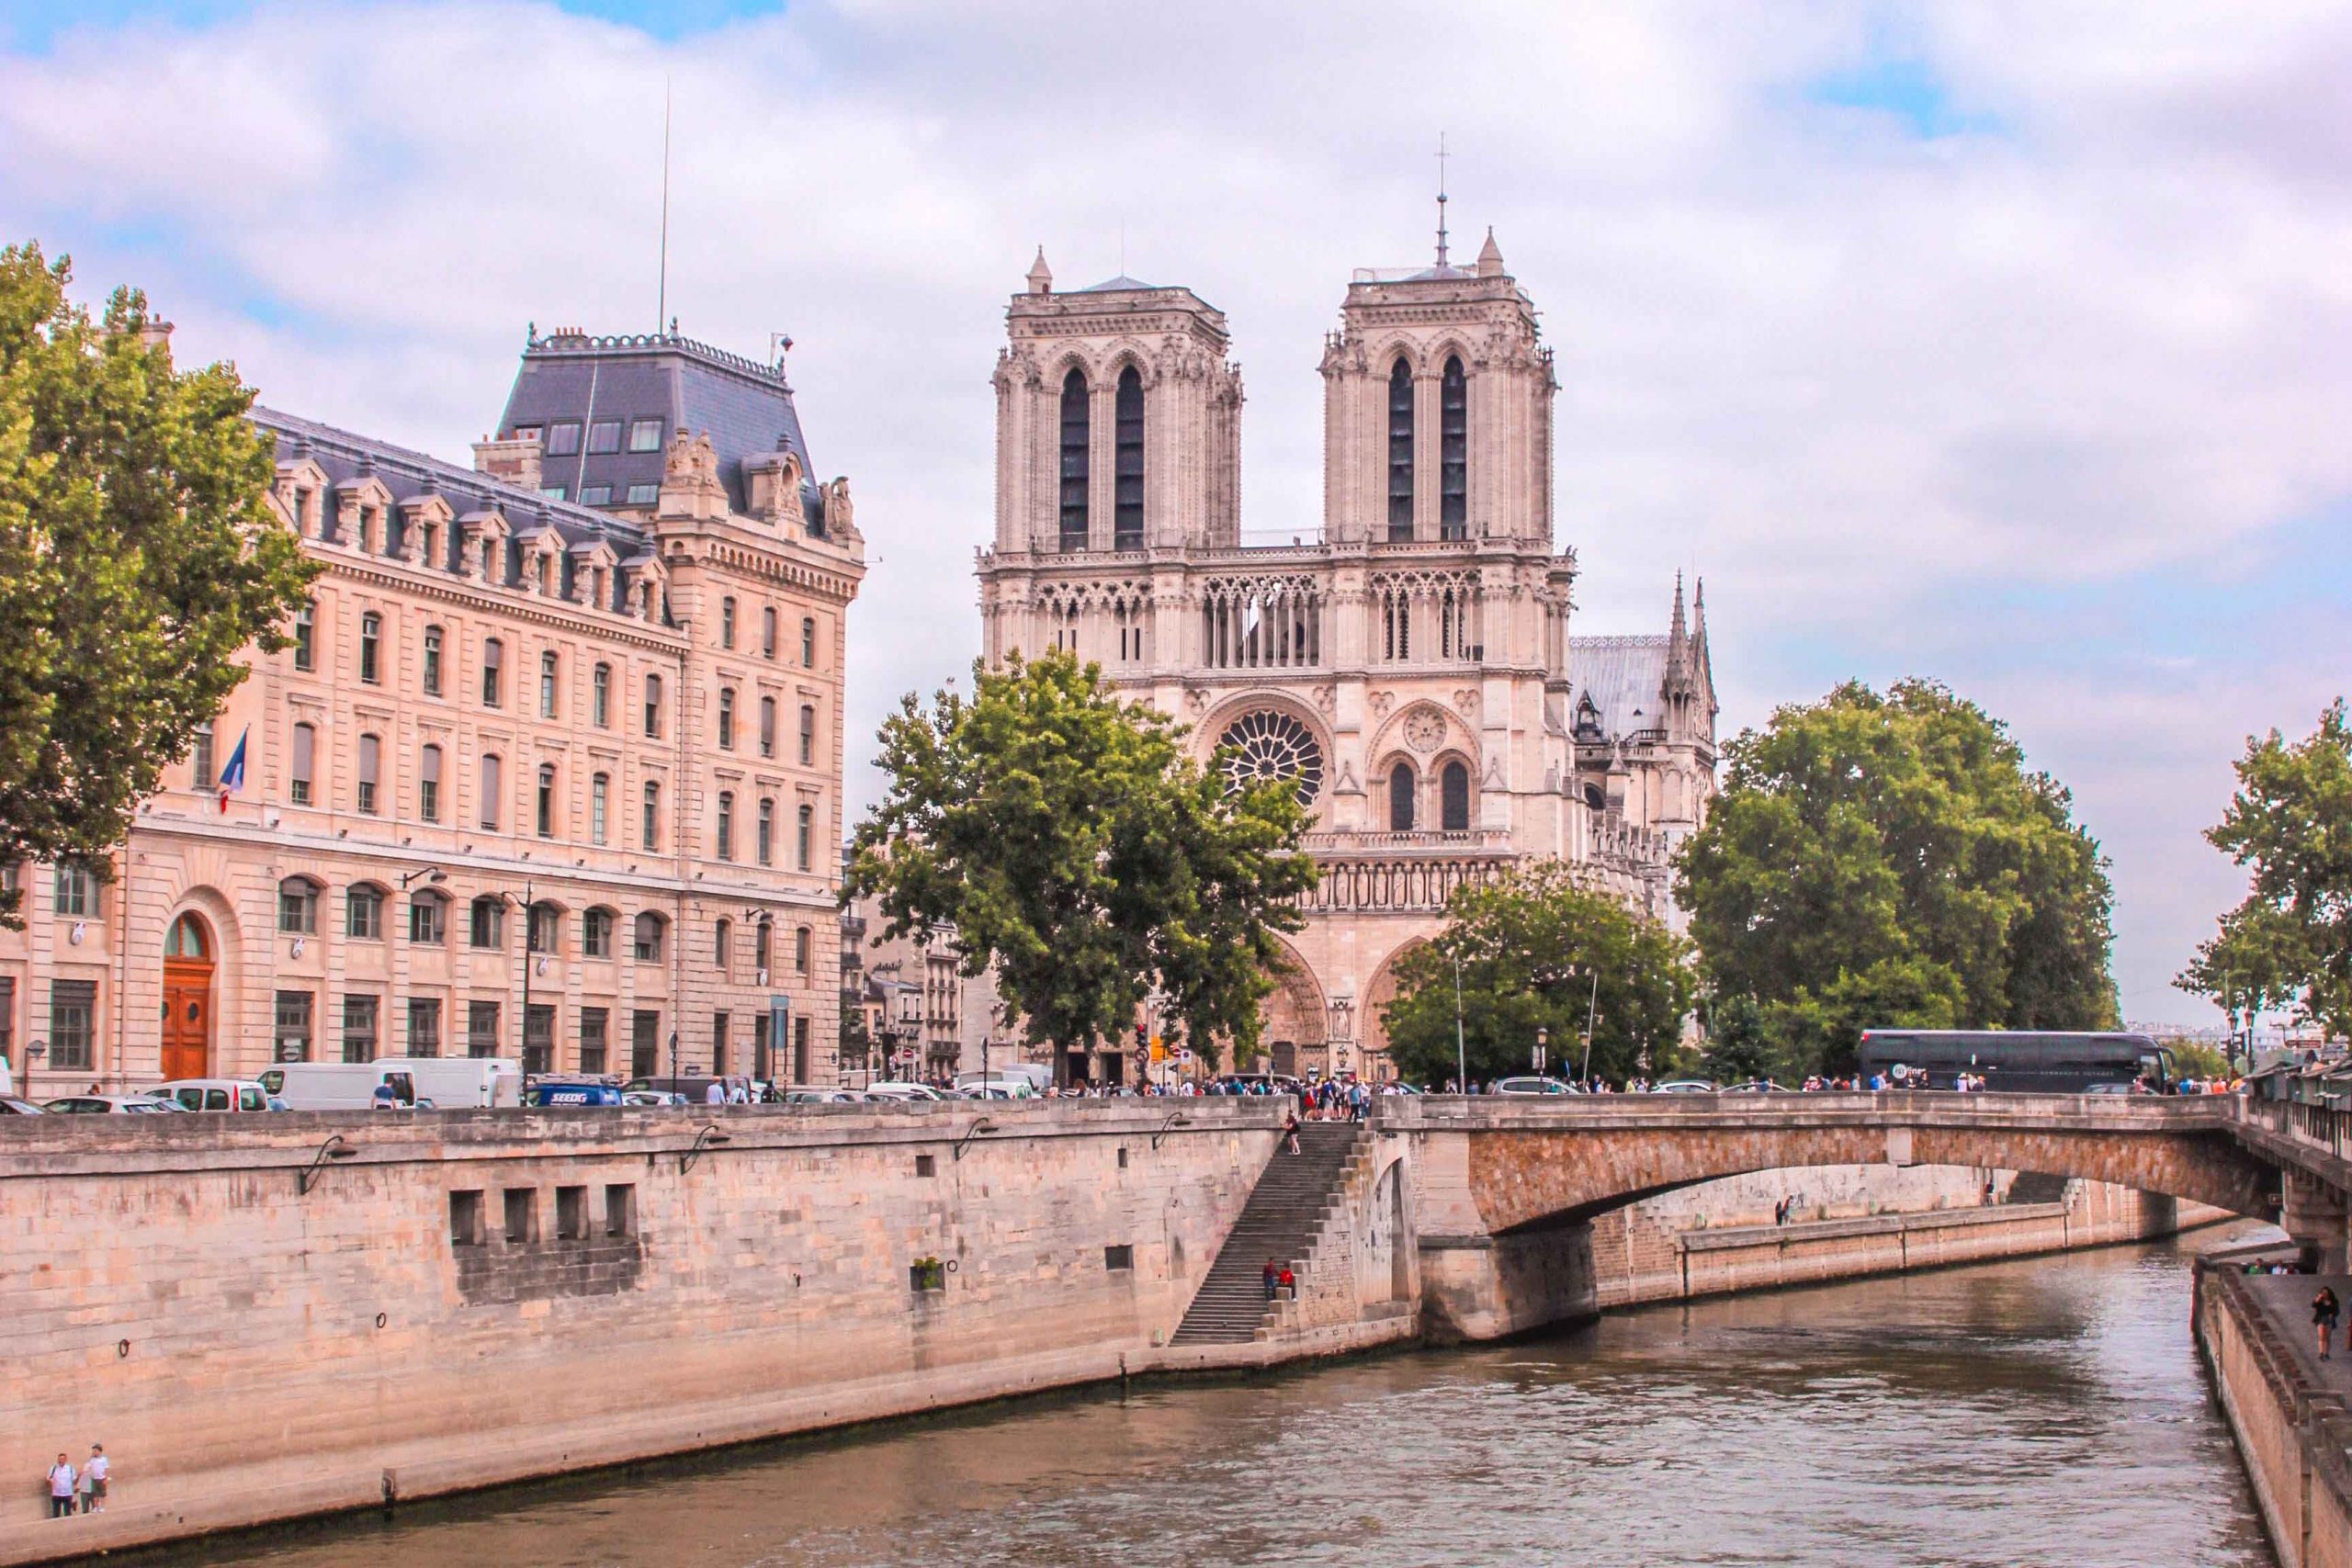 Member Advisory: Fire Reported at Notre Dame Cathedral in Paris